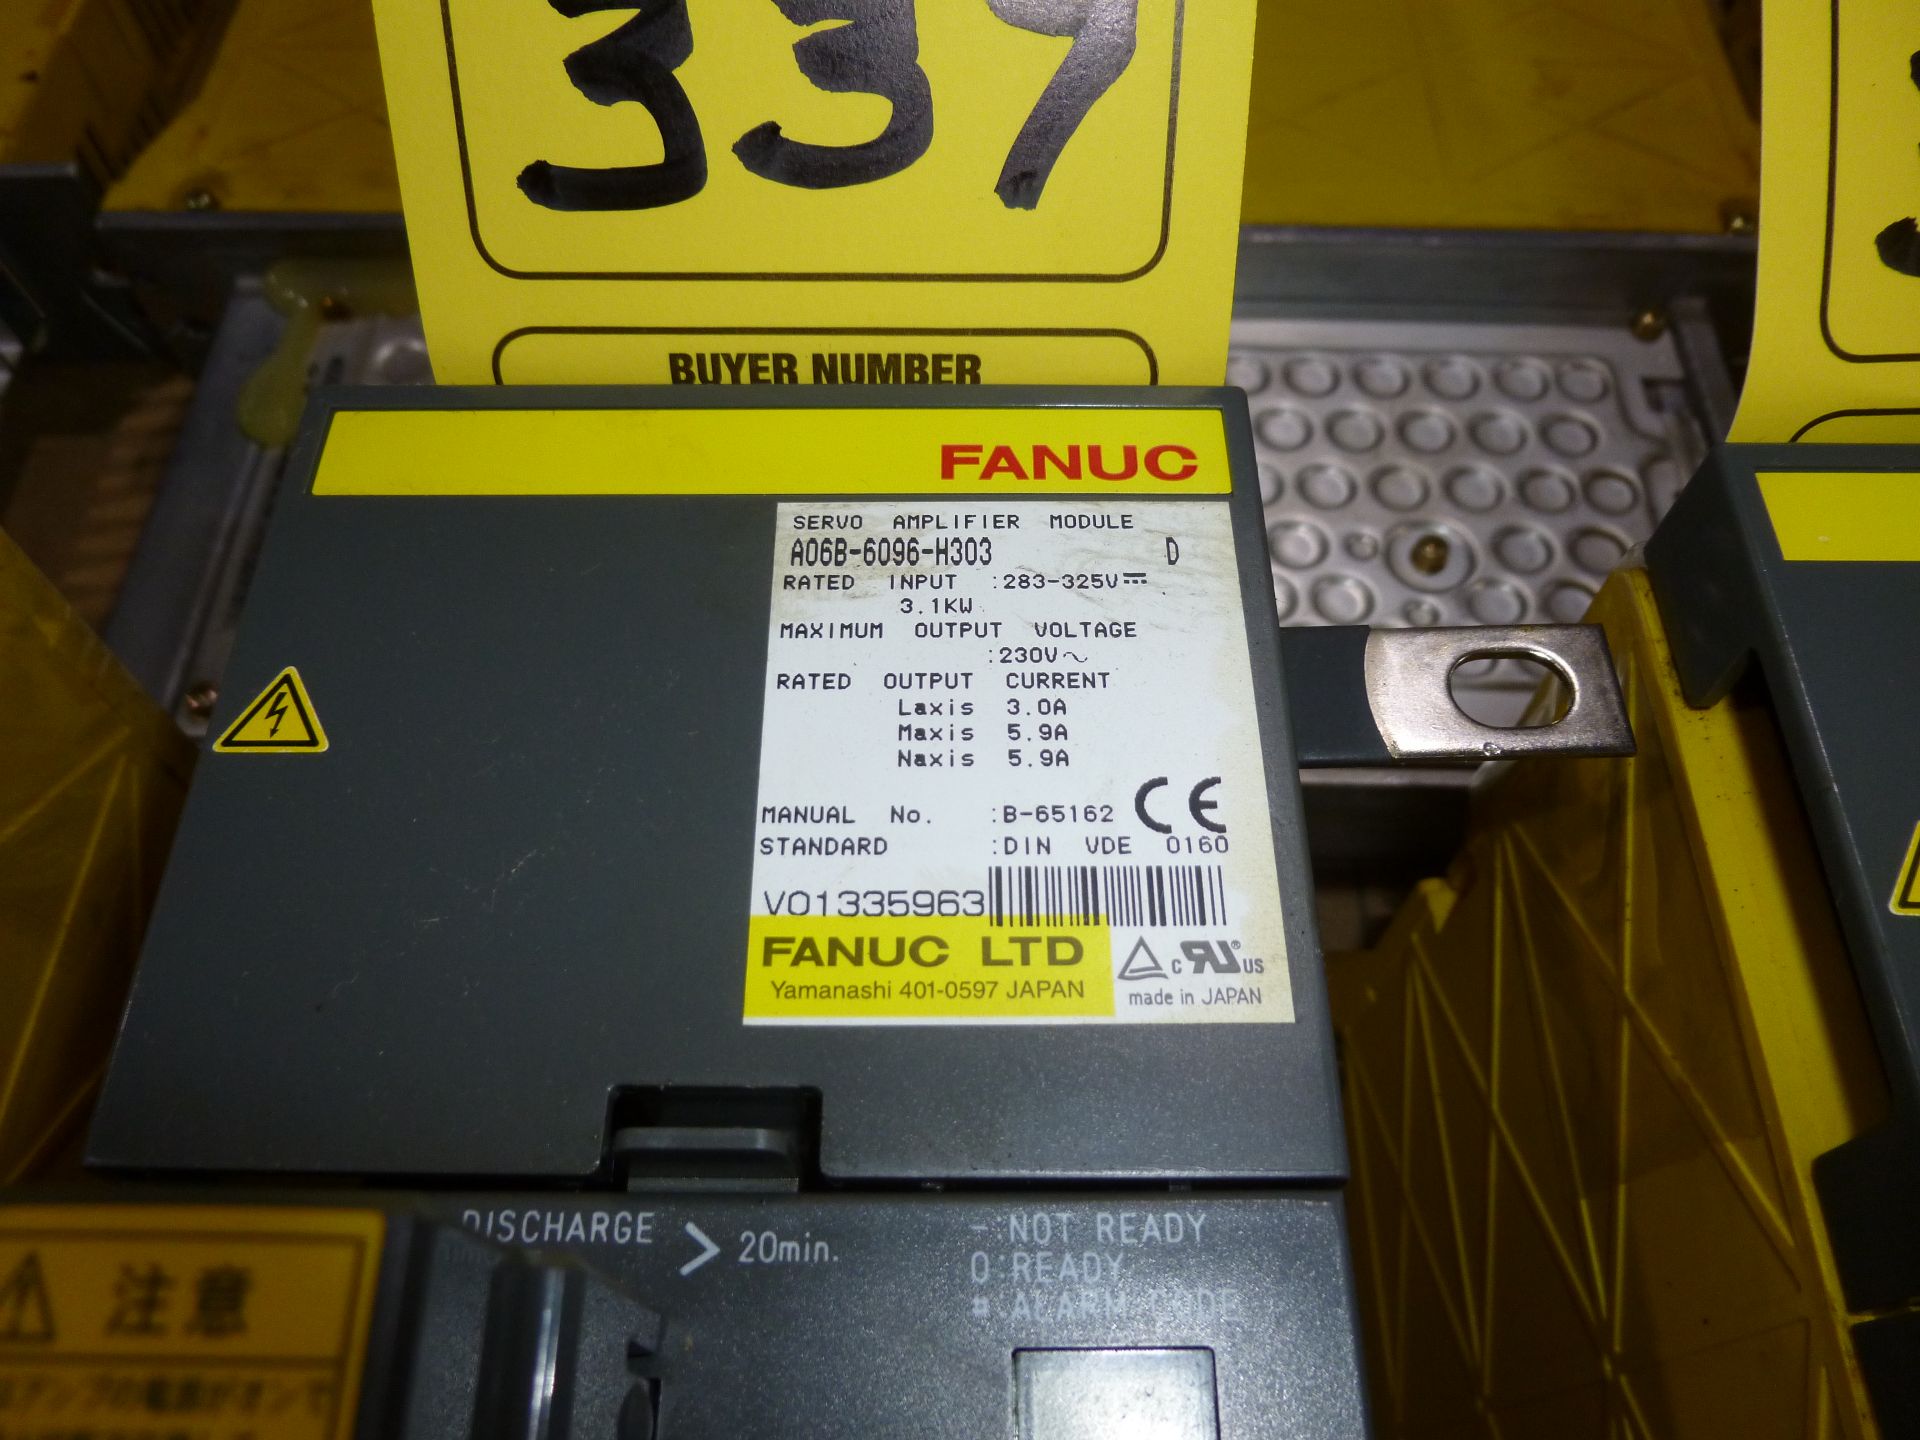 Fanuc servo amplifier module model A06B-6096-H303, as always with Brolyn LLC auctions, all lots - Image 2 of 2